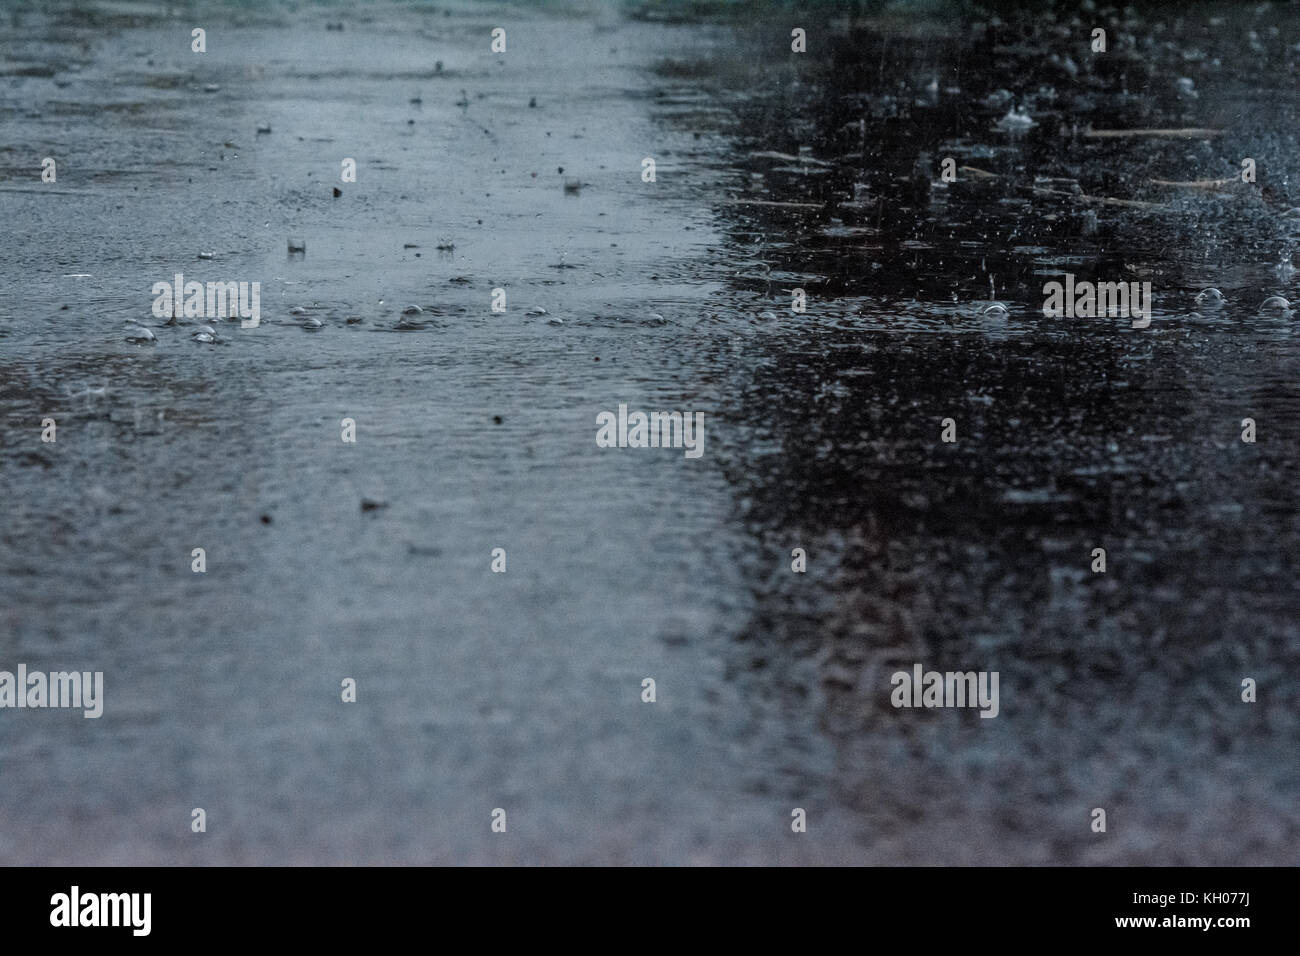 large raindrops falling on the road asphalt during a day of rain Stock Photo